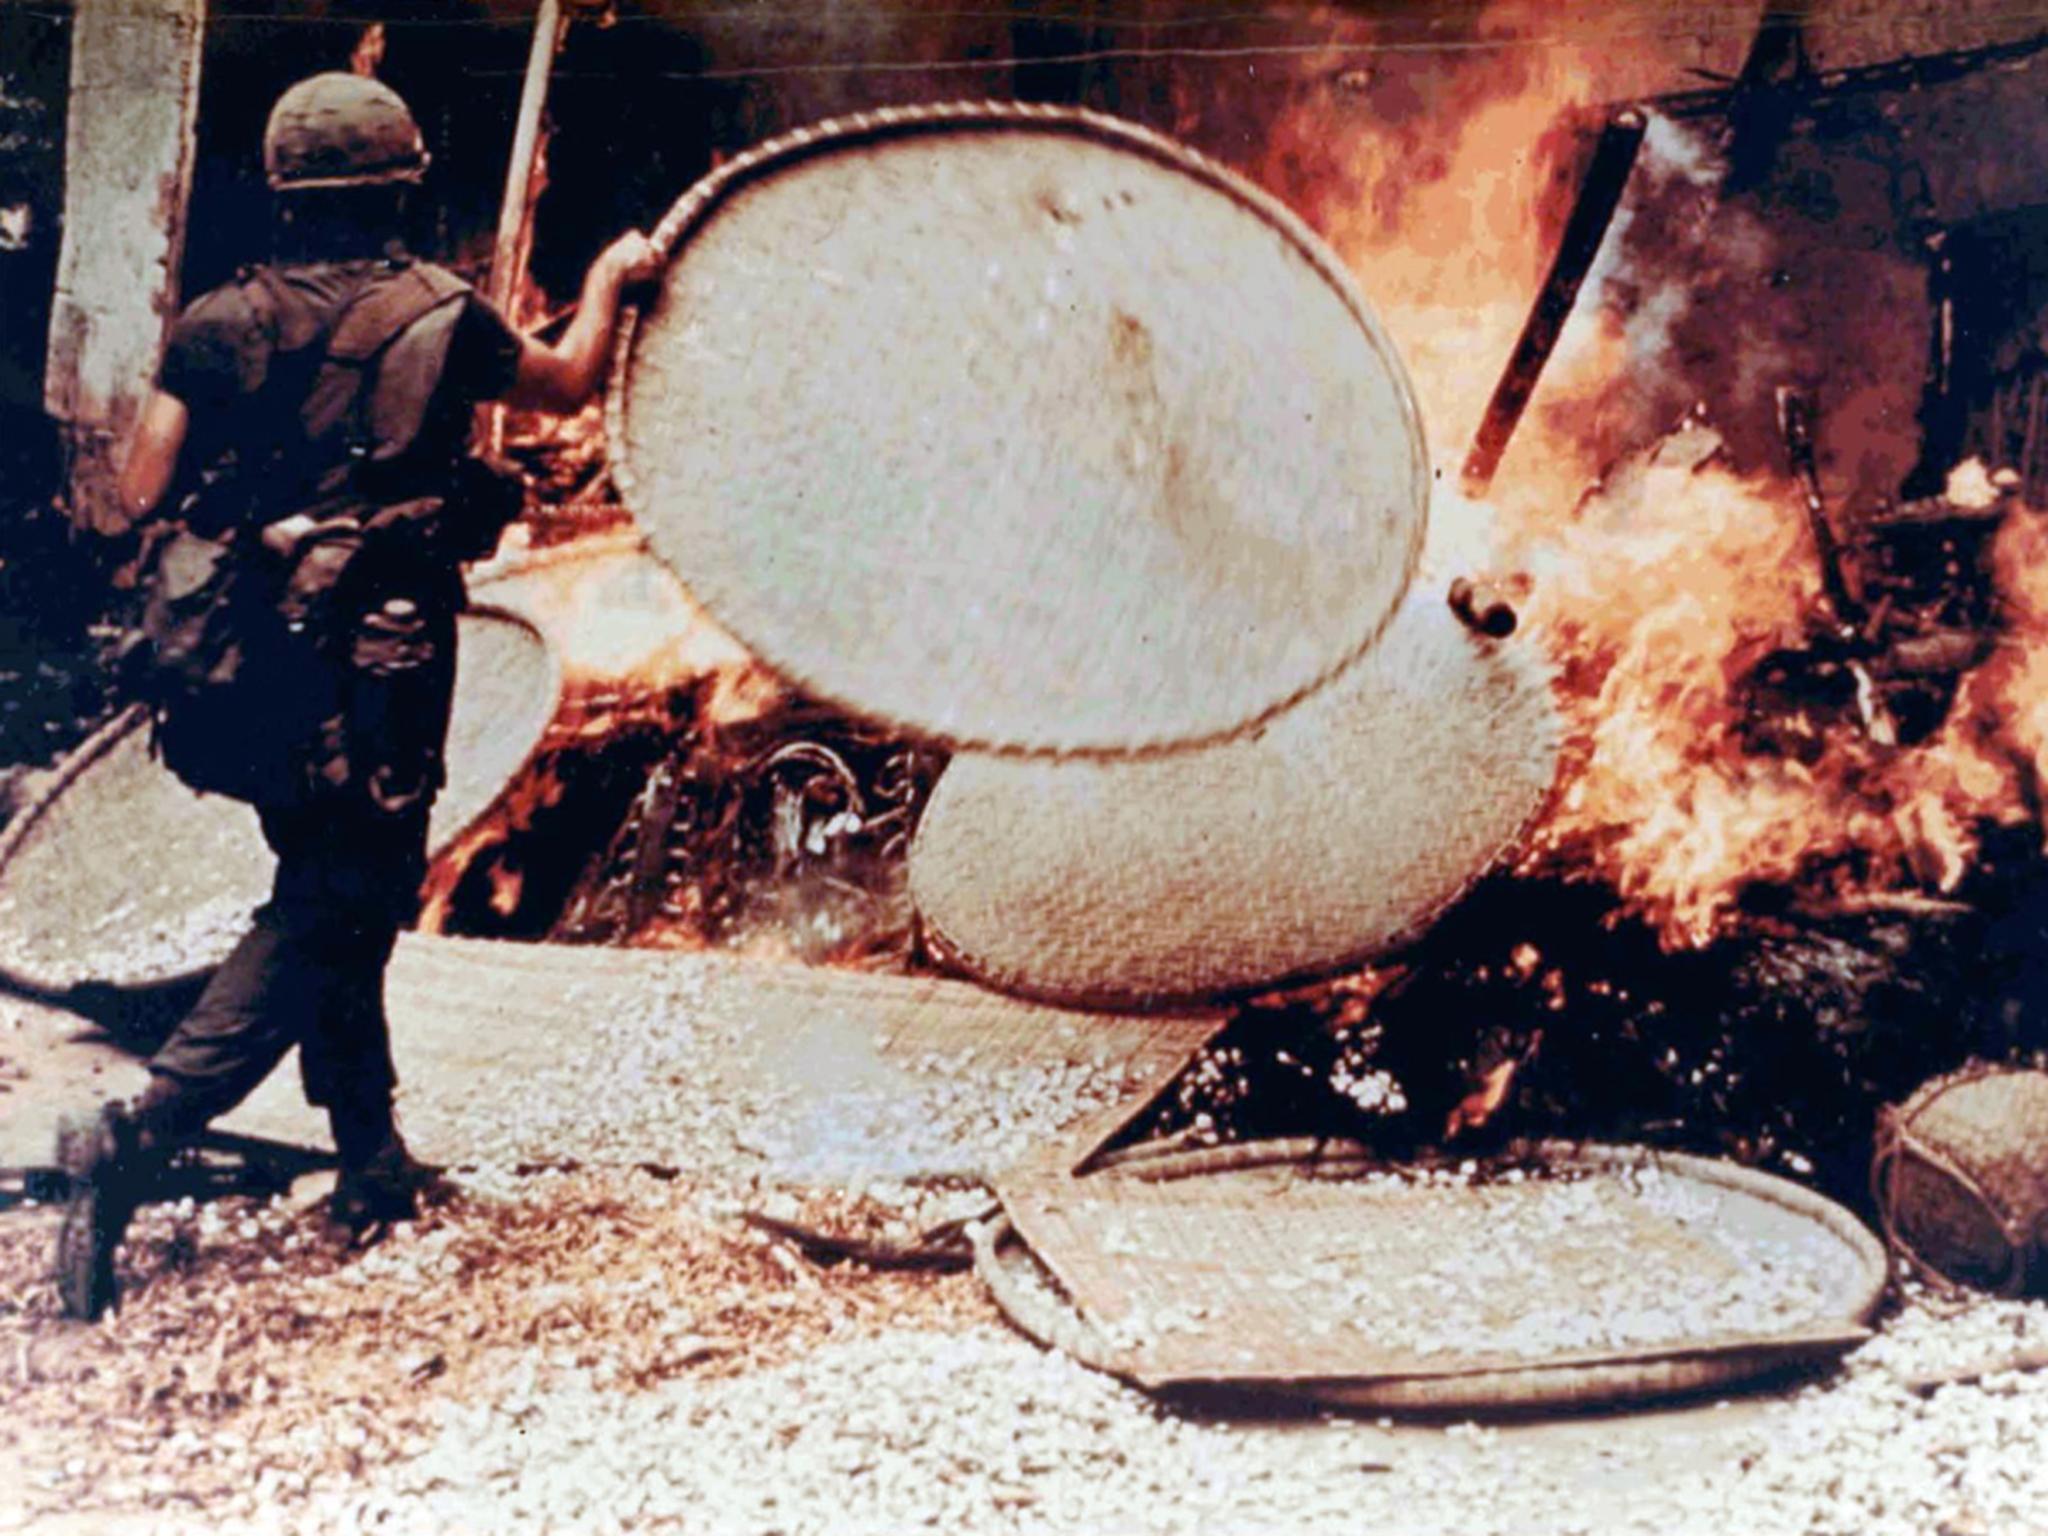 The massacre prompted global outrage when Hersh published his scoop in November 1969 and increased domestic opposition to US involvement in the Vietnam War